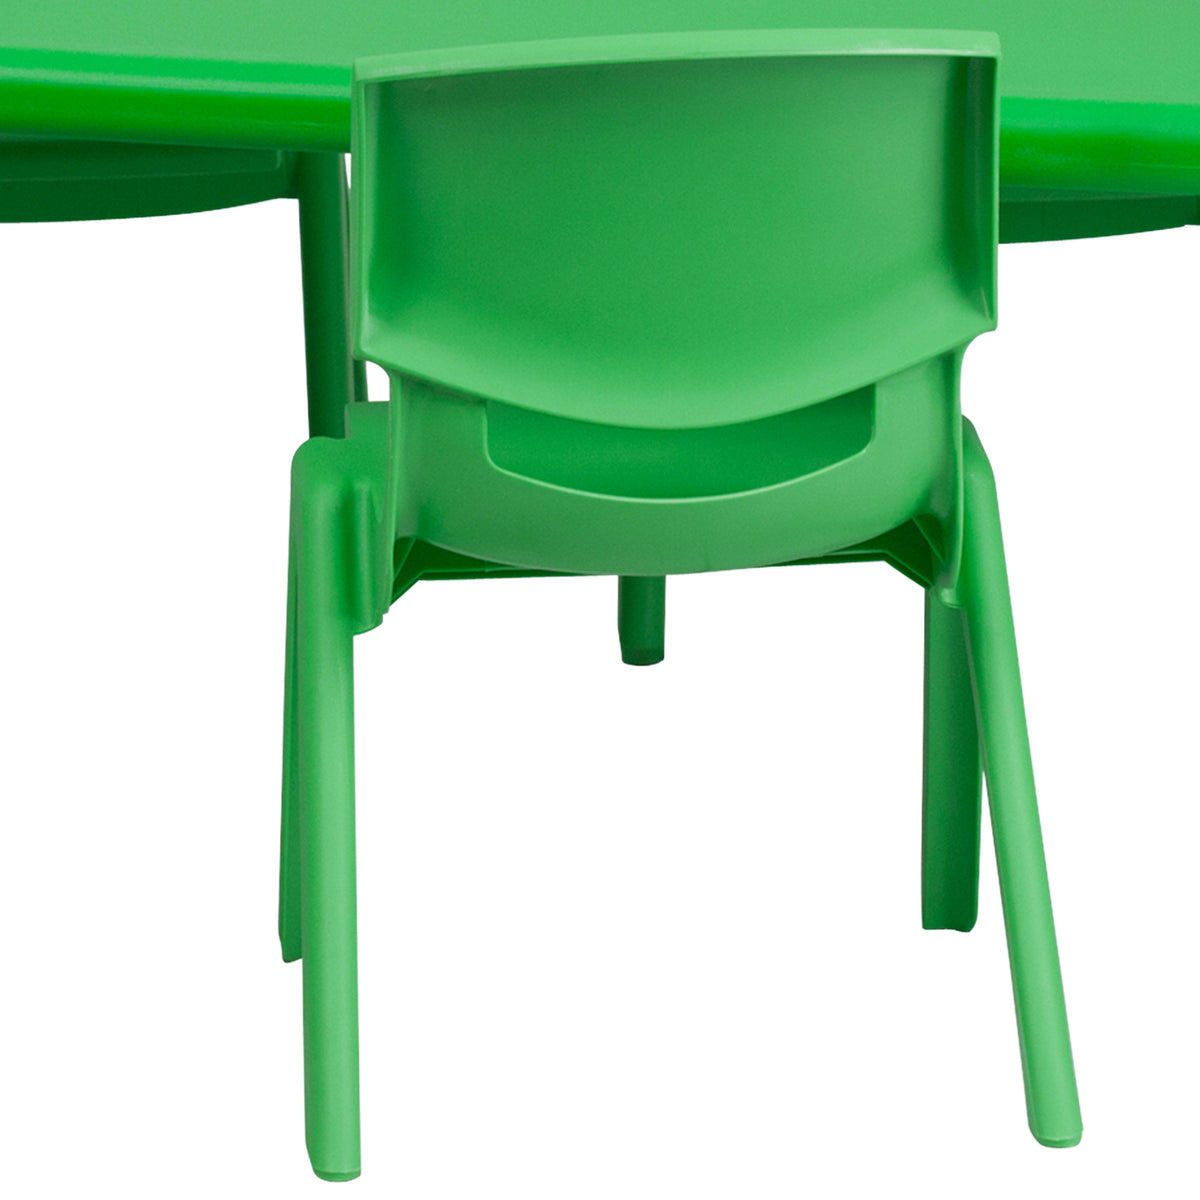 Green |#| 24inchW x 48inchL REC Green Plastic Height Adjustable Activity Table Set - 6 Chairs